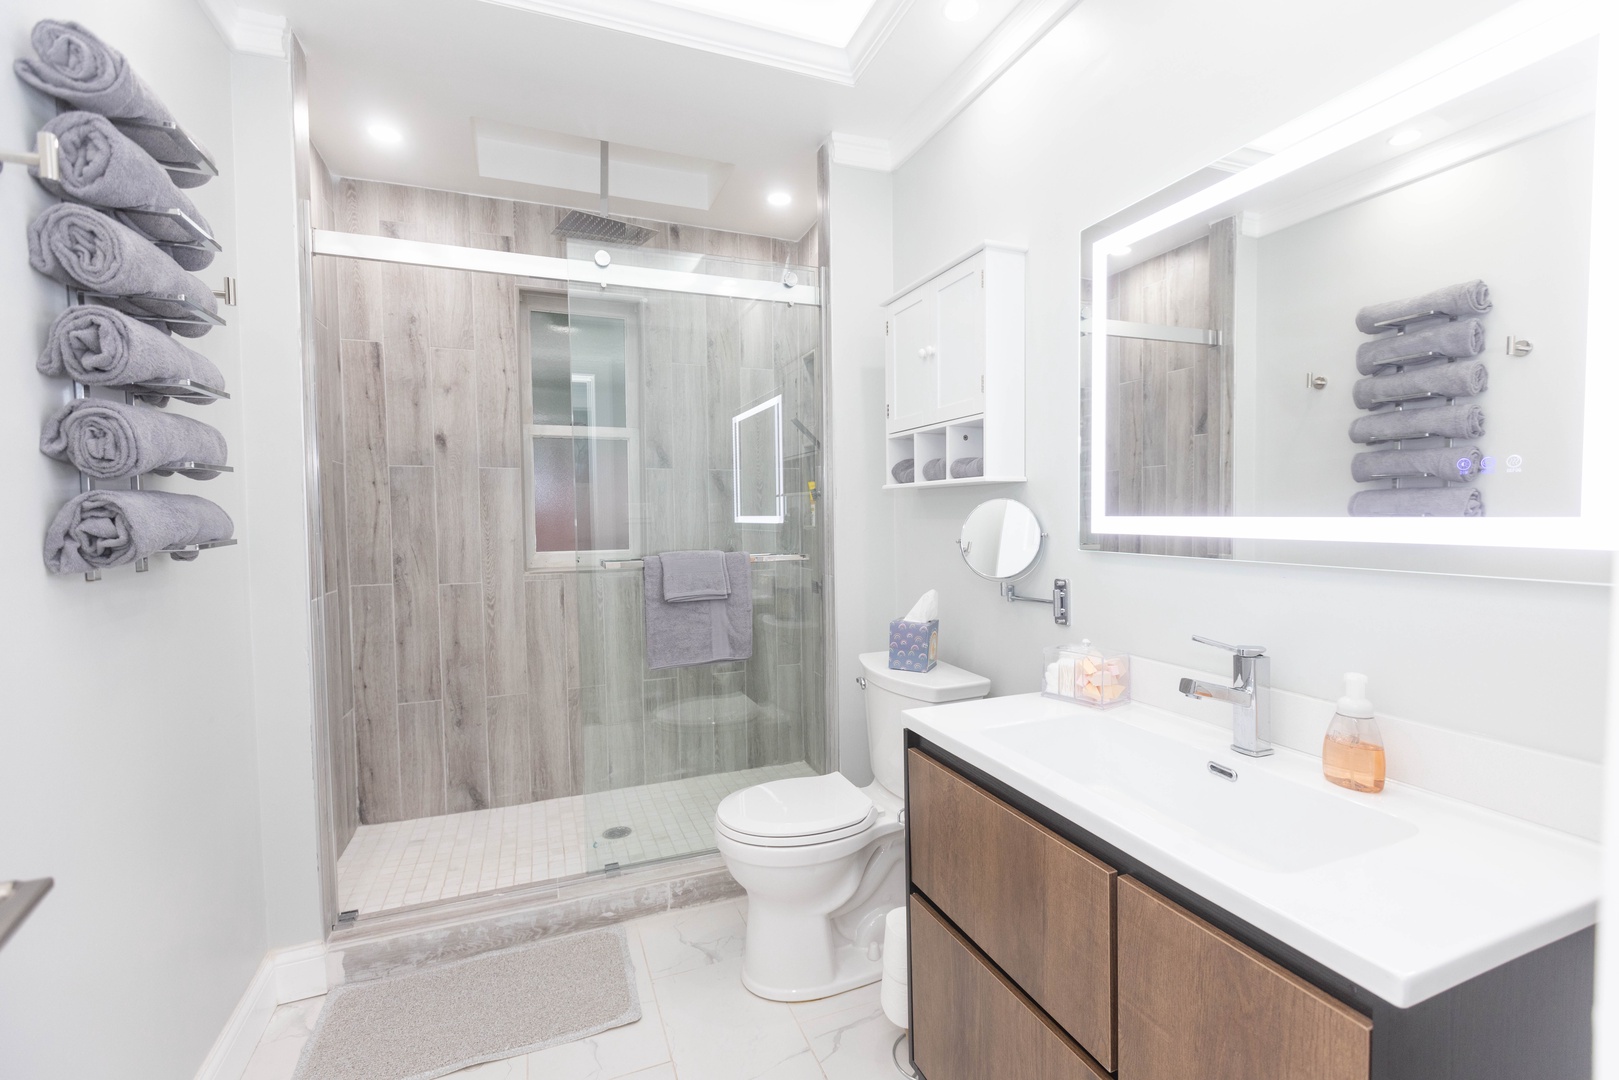 This 2nd floor full bath includes a single vanity & glass shower with rain showerhead